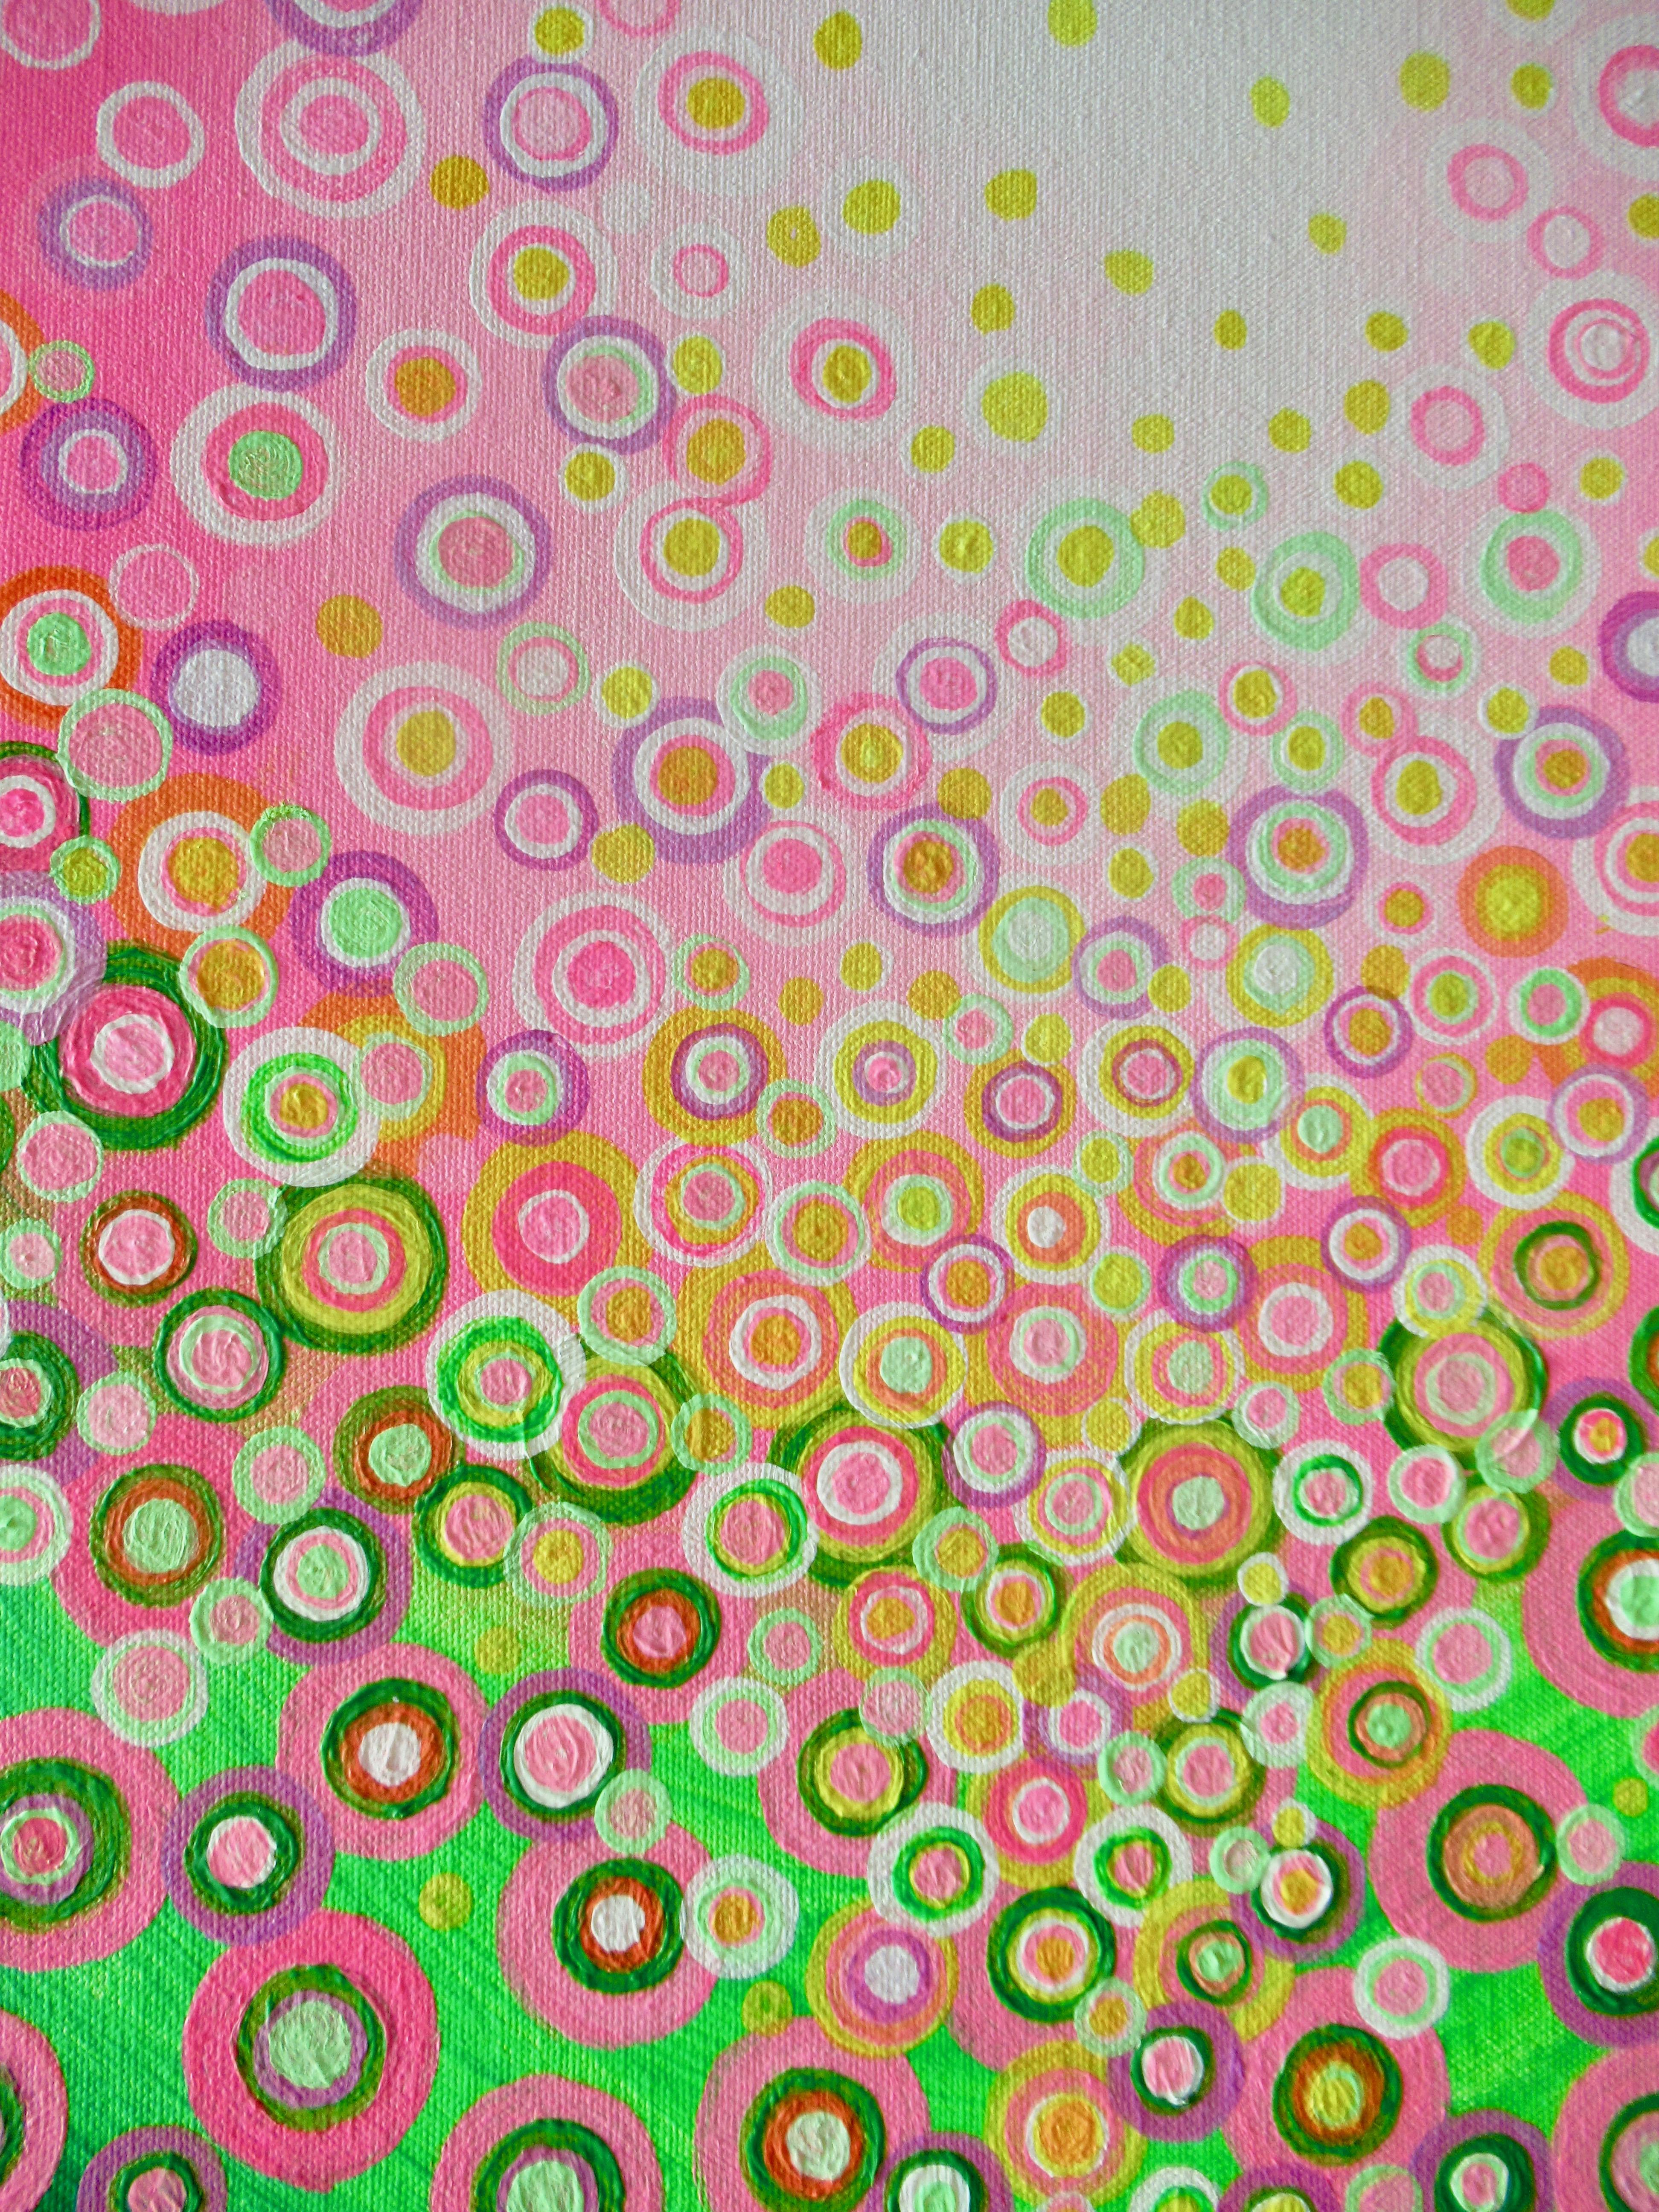 <p>Artist Comments<br />Dainty pink and green circles softly tumble from the sky. As if bubbles reflecting a myriad of colors on their surface while an ethereal light illuminates from above. Part of artist Natasha Tayles's signature Circles